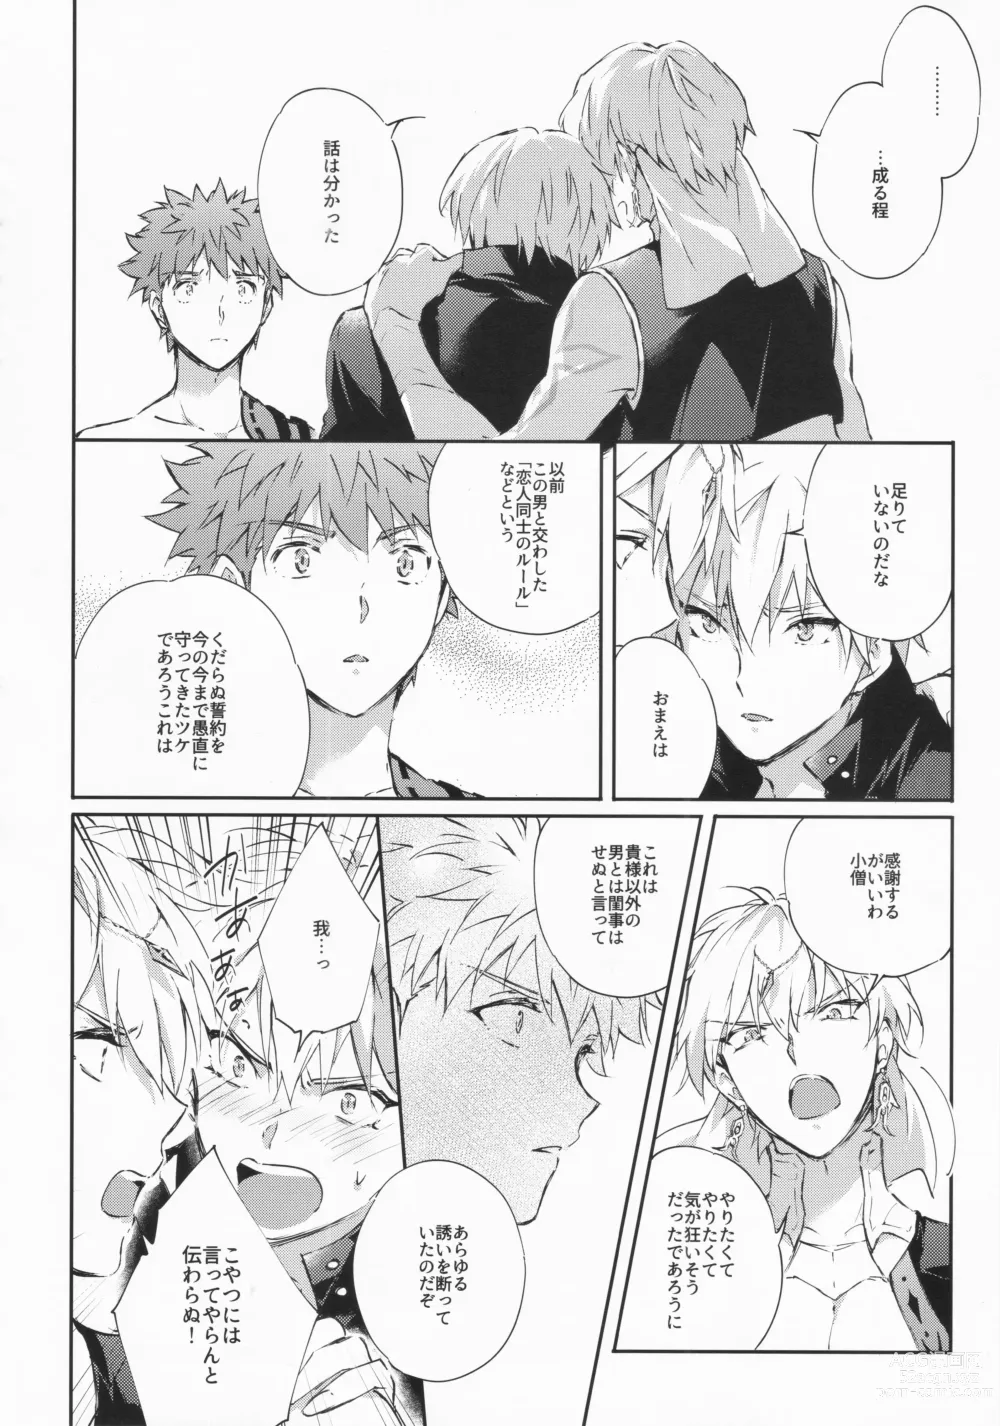 Page 23 of doujinshi STARDUST LOVESONG encore special story 1st After 7 Days